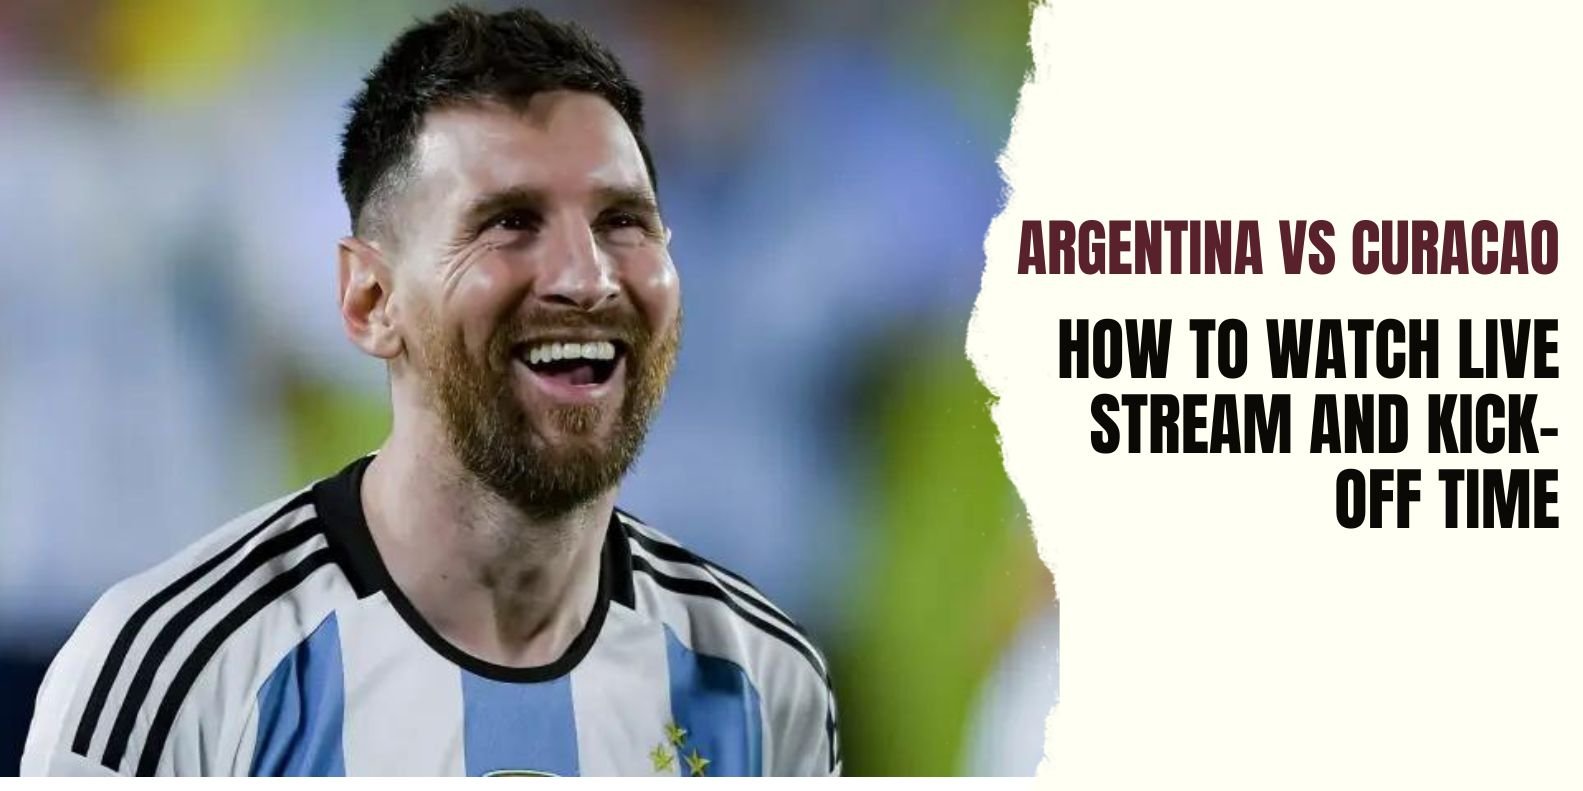 Argentina vs Curacao How to Watch Live Stream and Kick-off Time